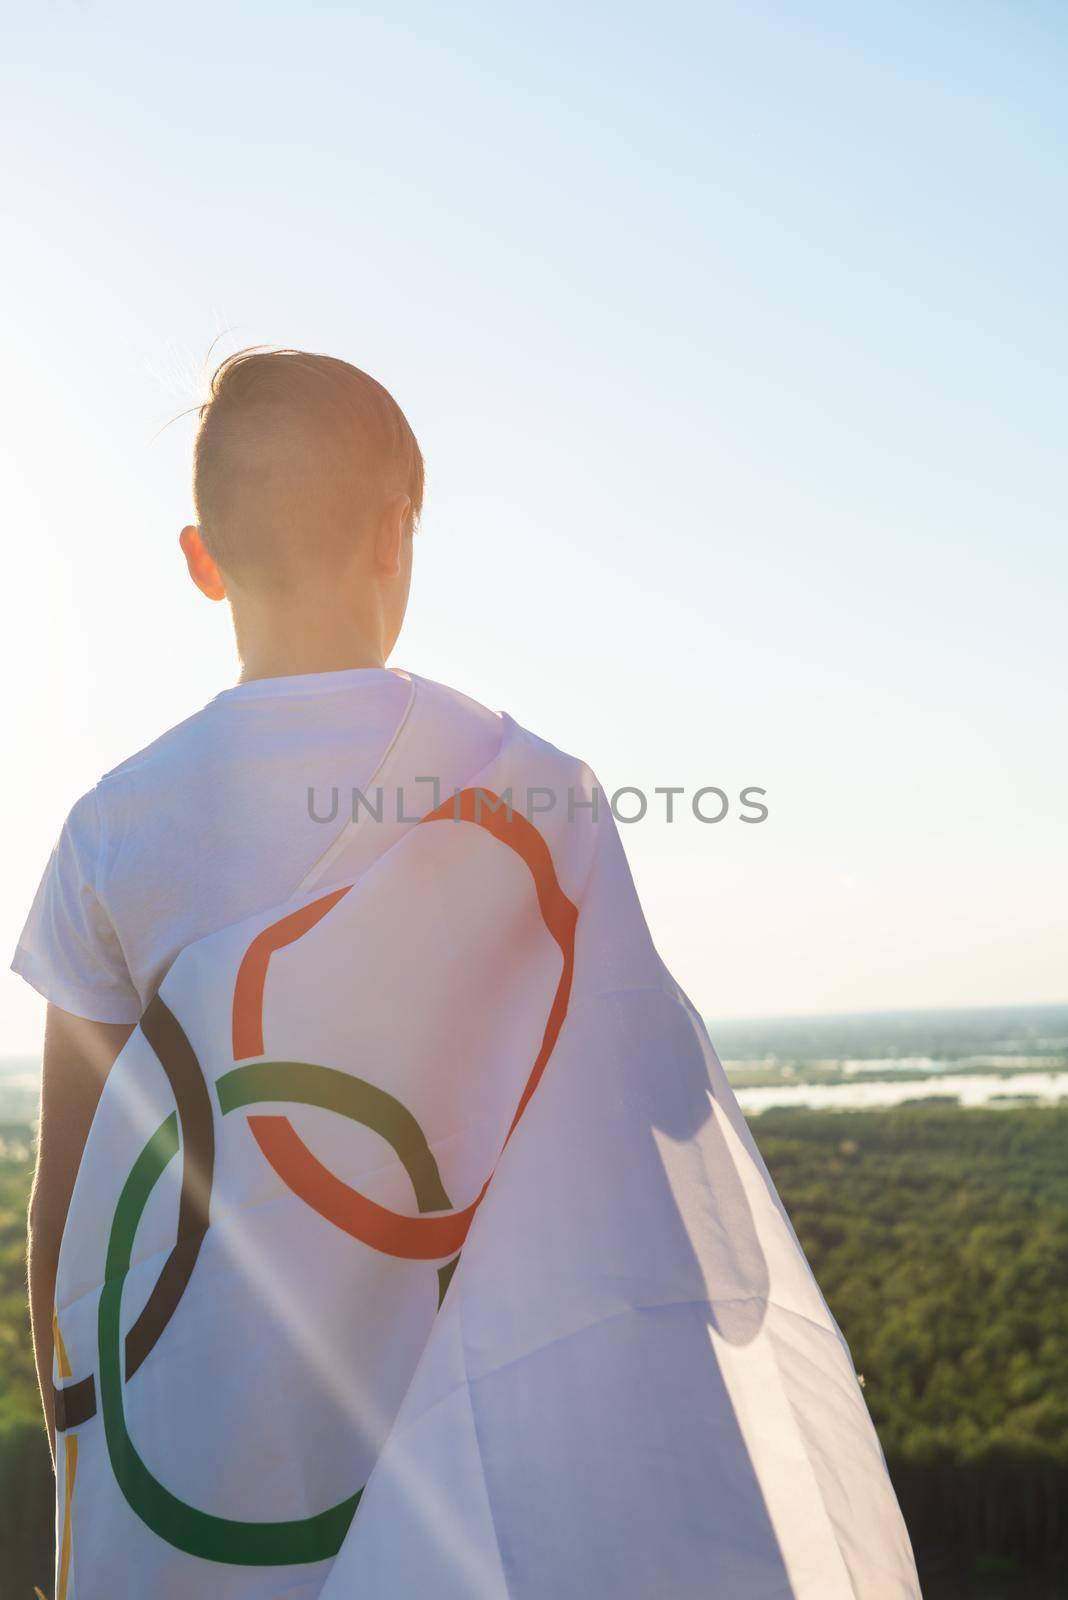 Blonde boy waving waving flag the Olympic Games outdoors over blue sky at the river bank by rusak